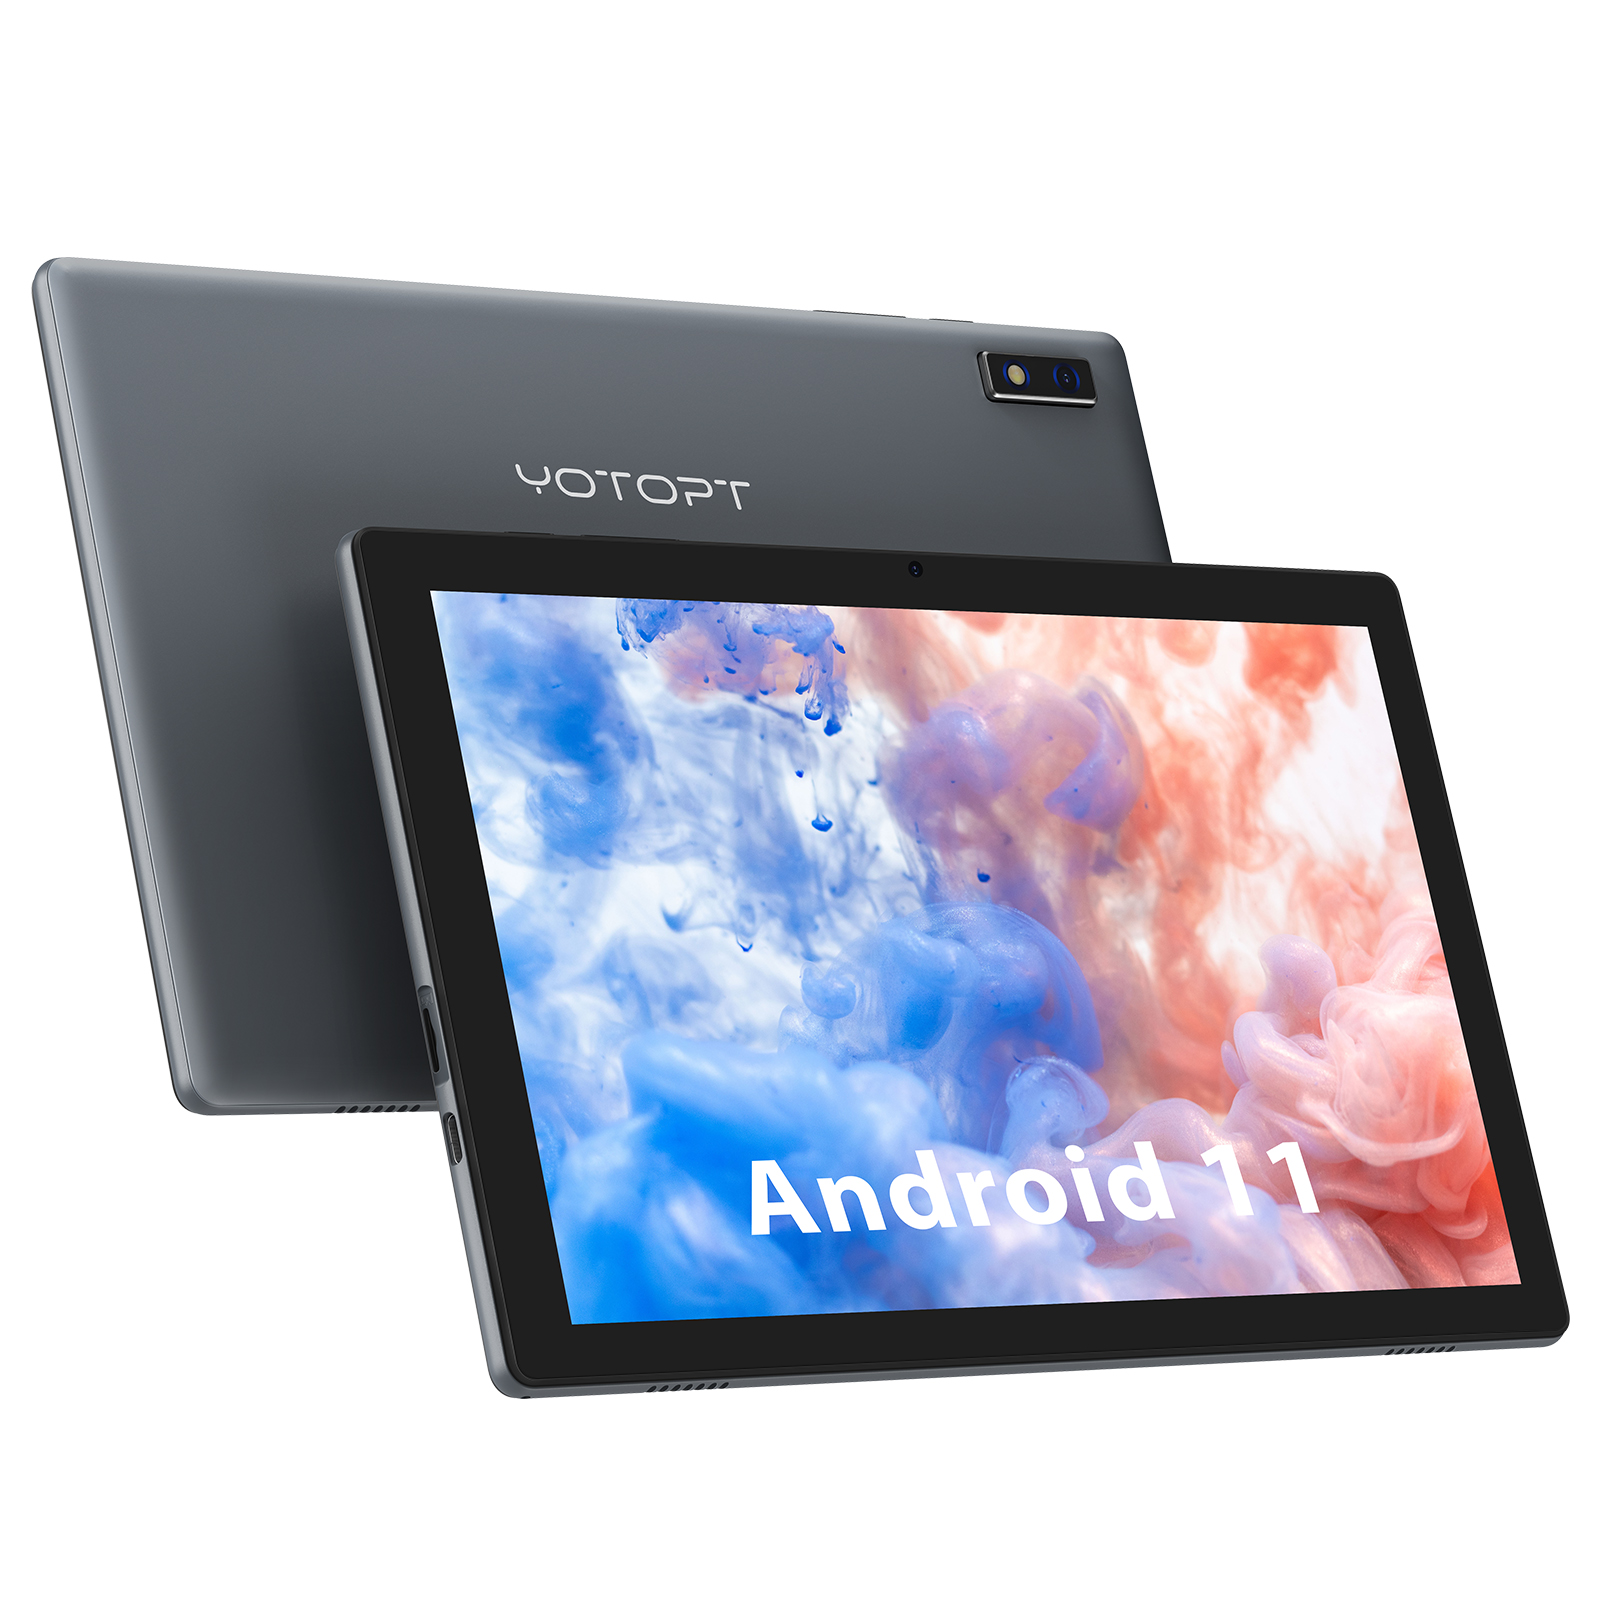 10 Inch Android 11 Tablet, Octa-Core 1.8GHz Processor, 4GB RAM